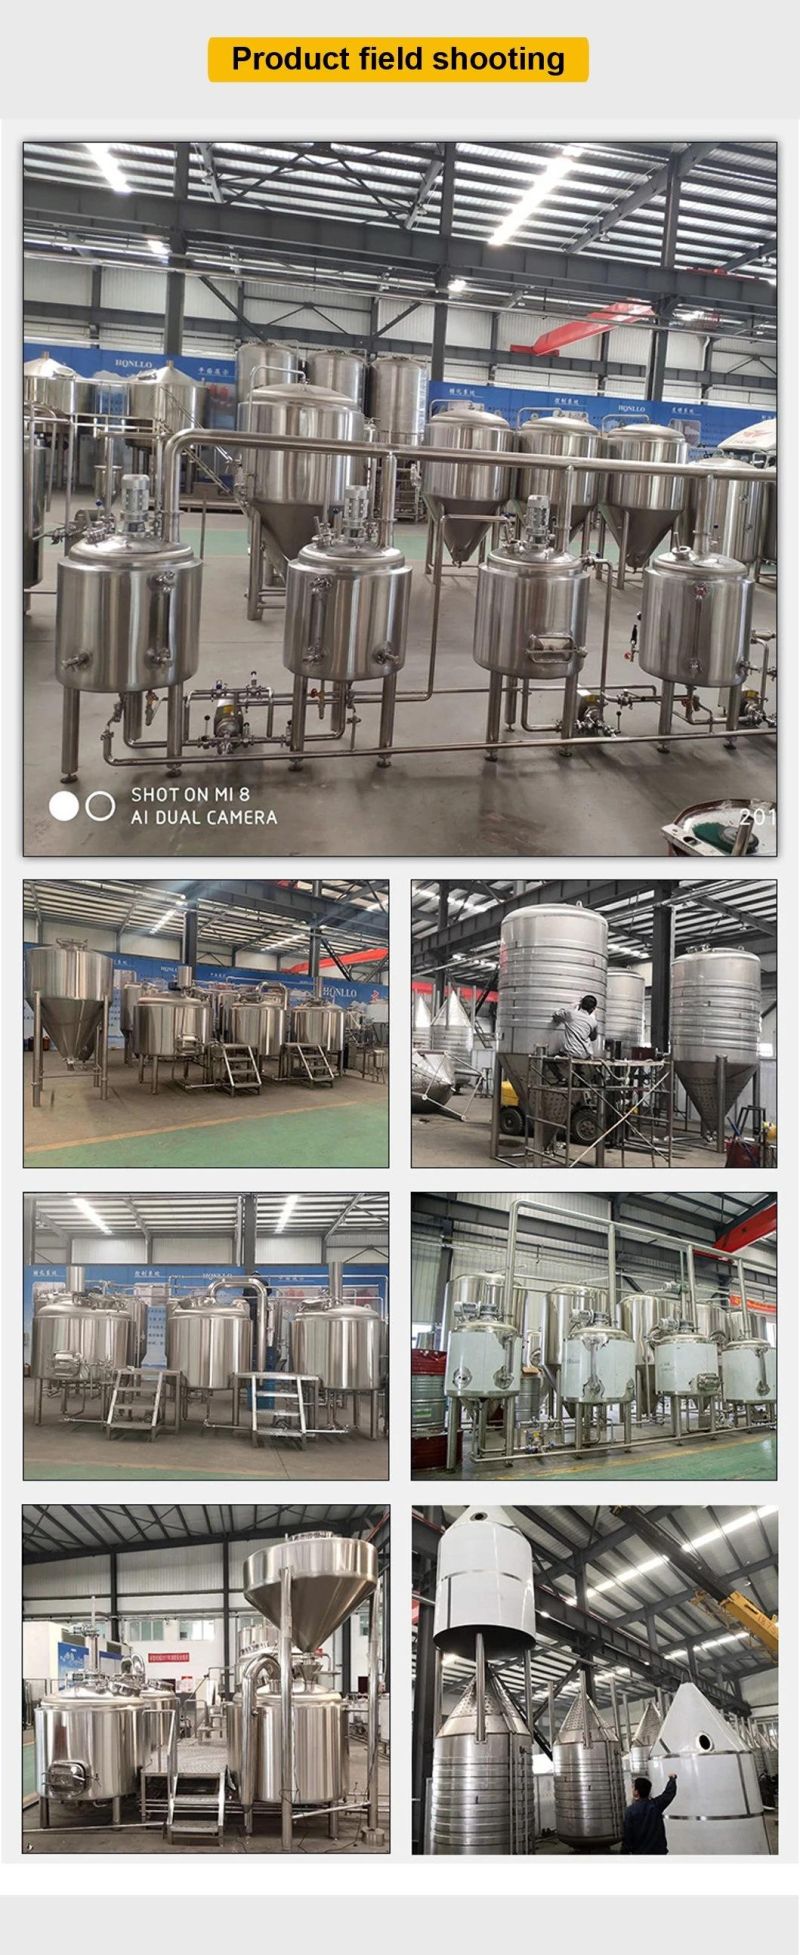 Completely Fully Set of Beer Brewery Equipment Used in Pubs Bar